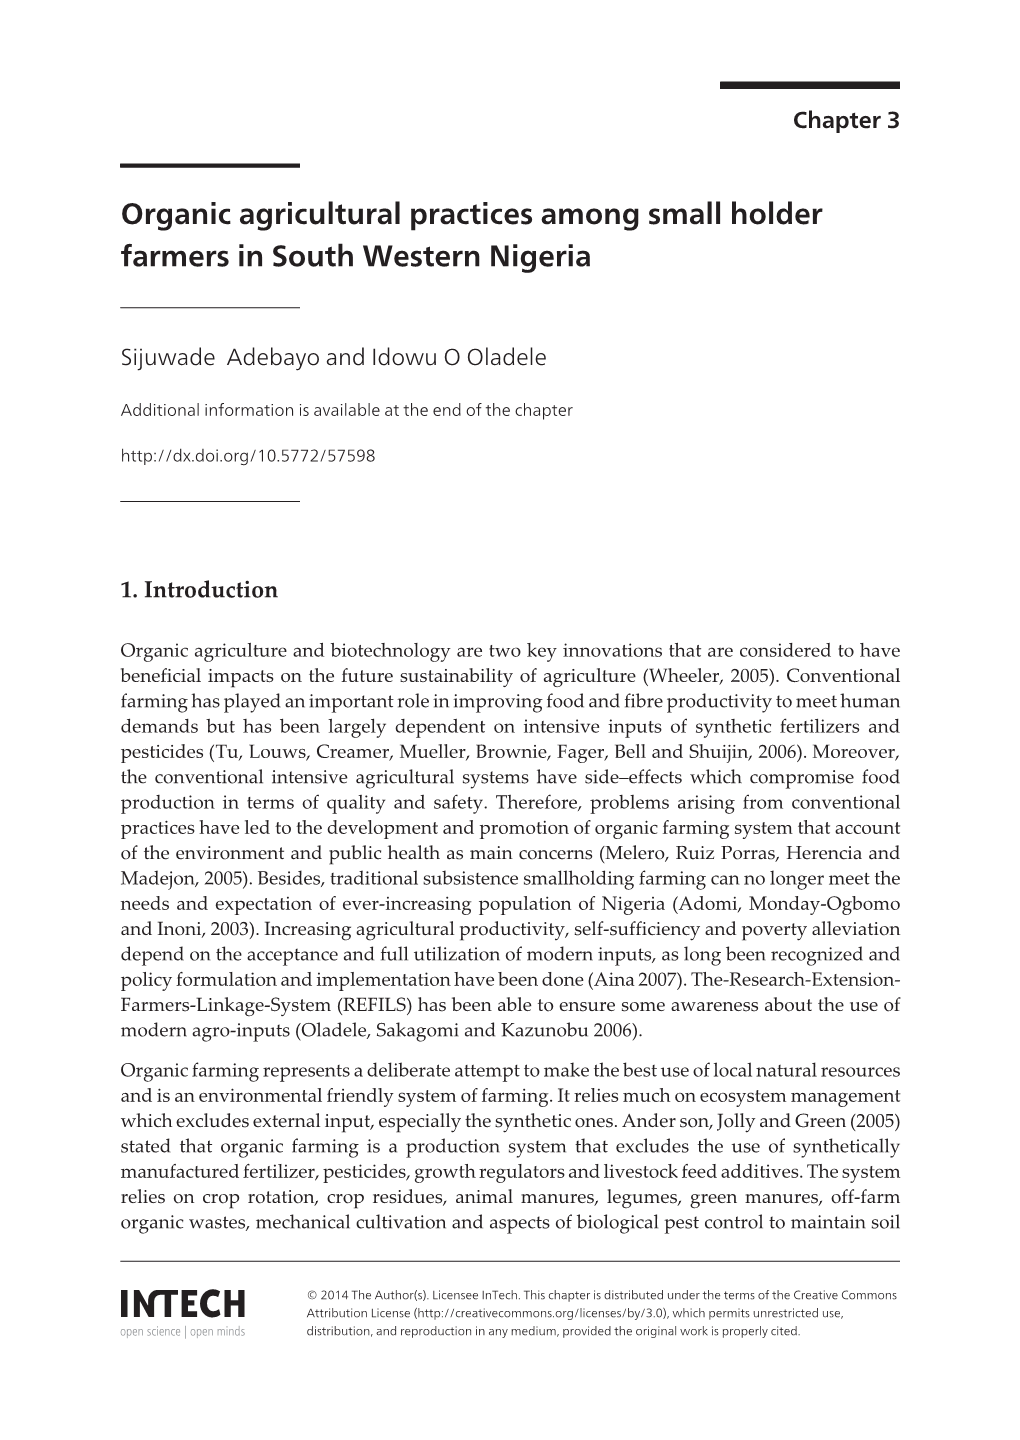 Organic Agricultural Practices Among Small Holder Farmers in South Western Nigeria